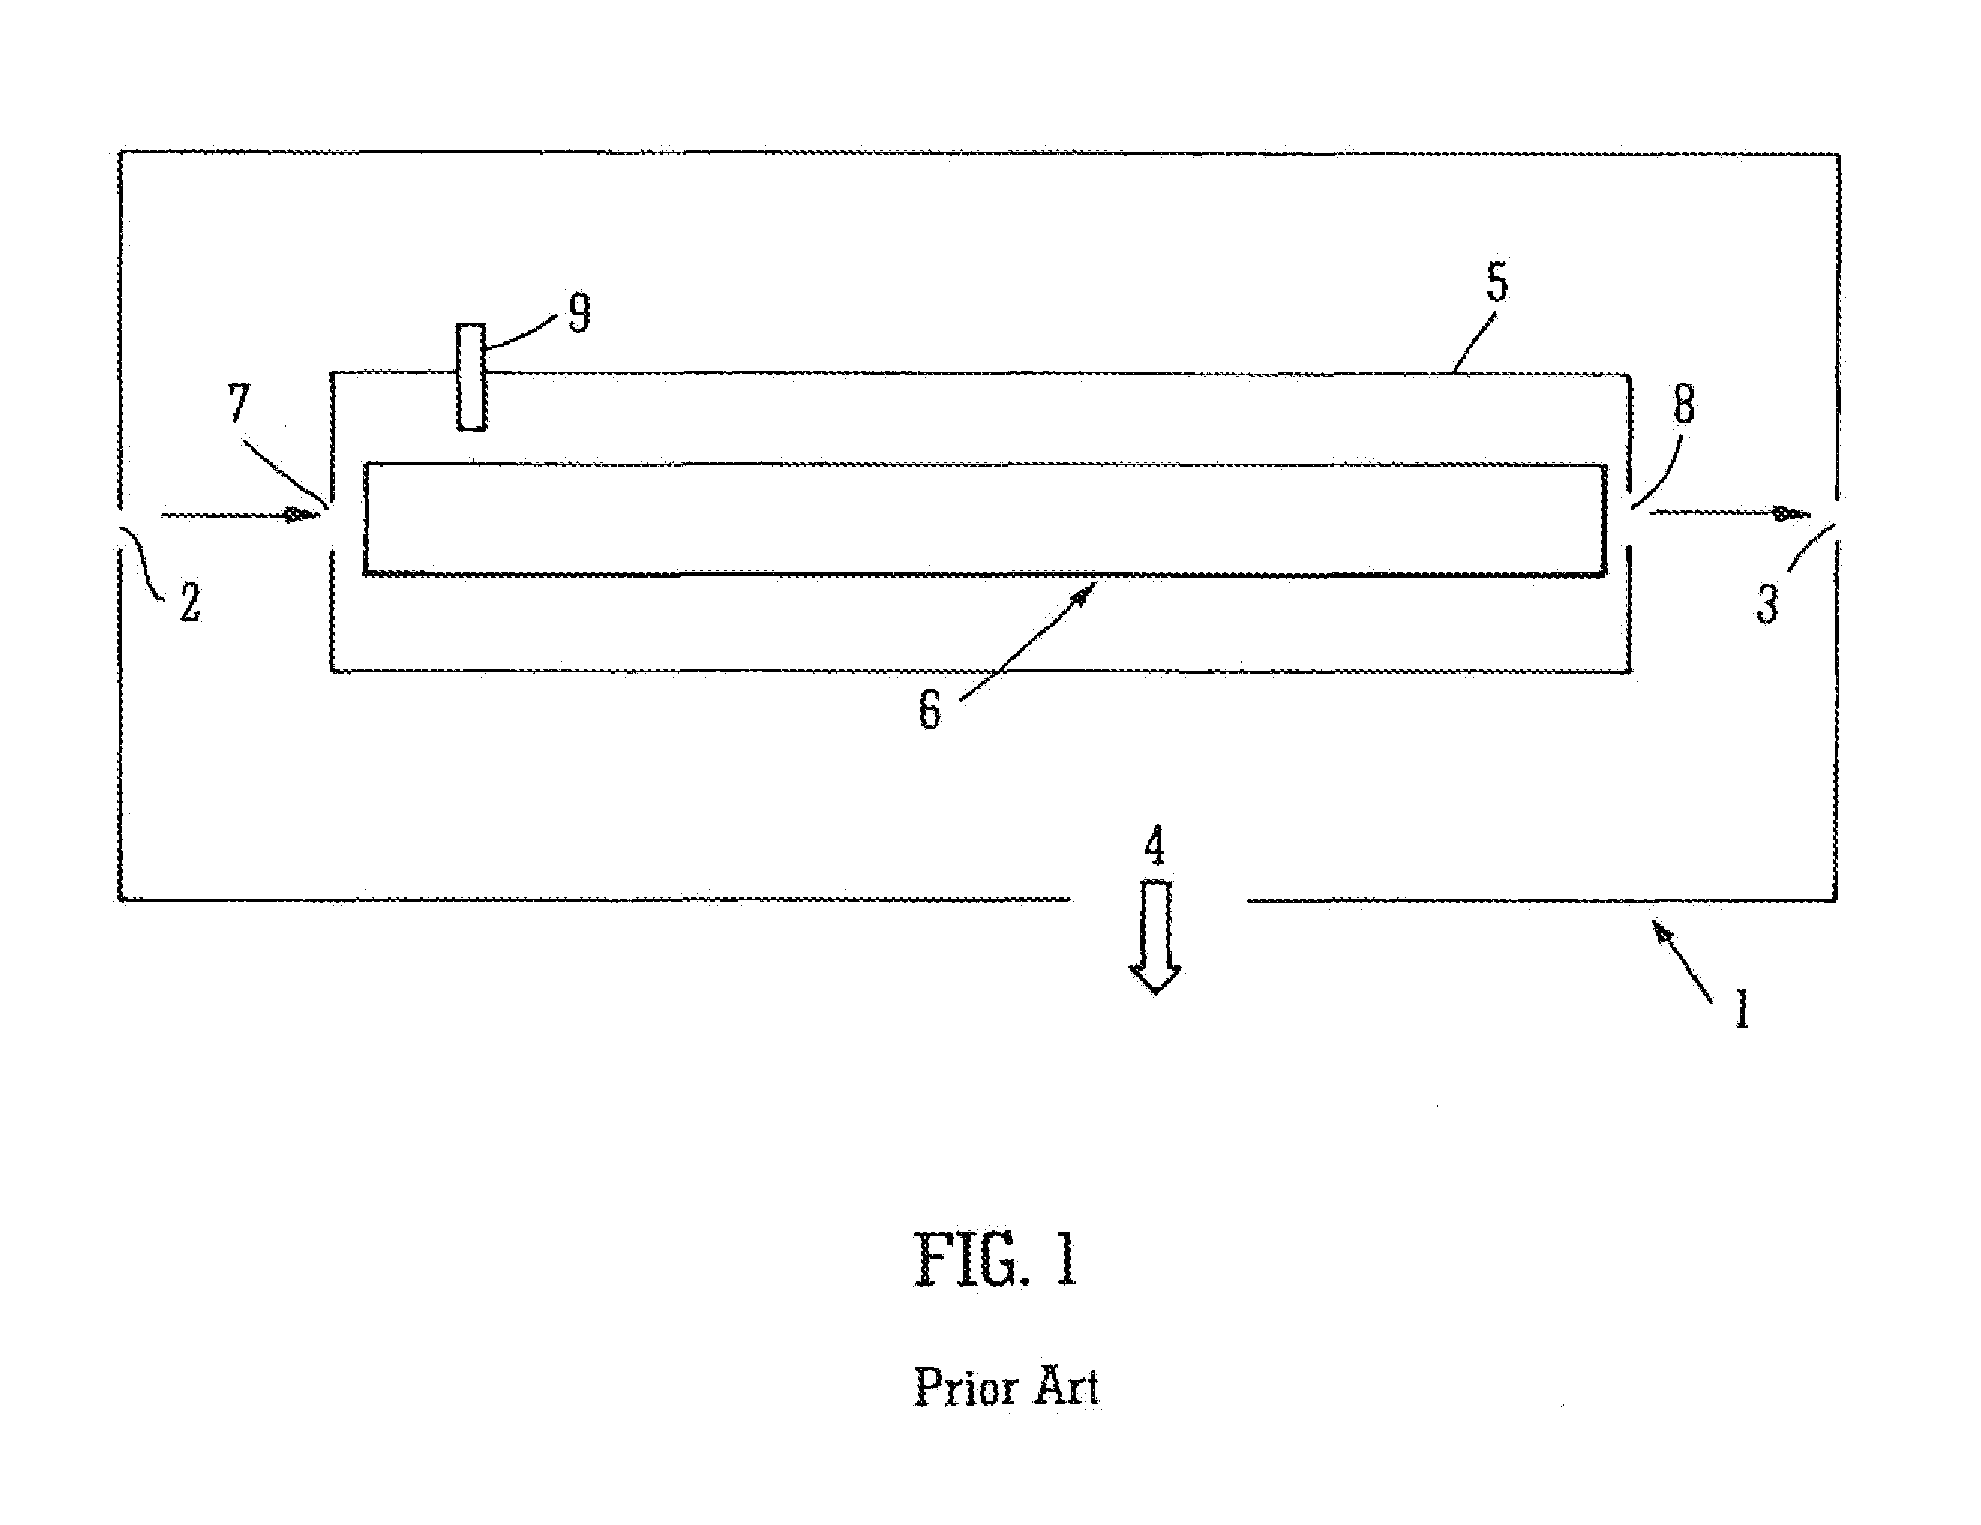 Apparatus Comprising an Ion Mobility Spectrometer